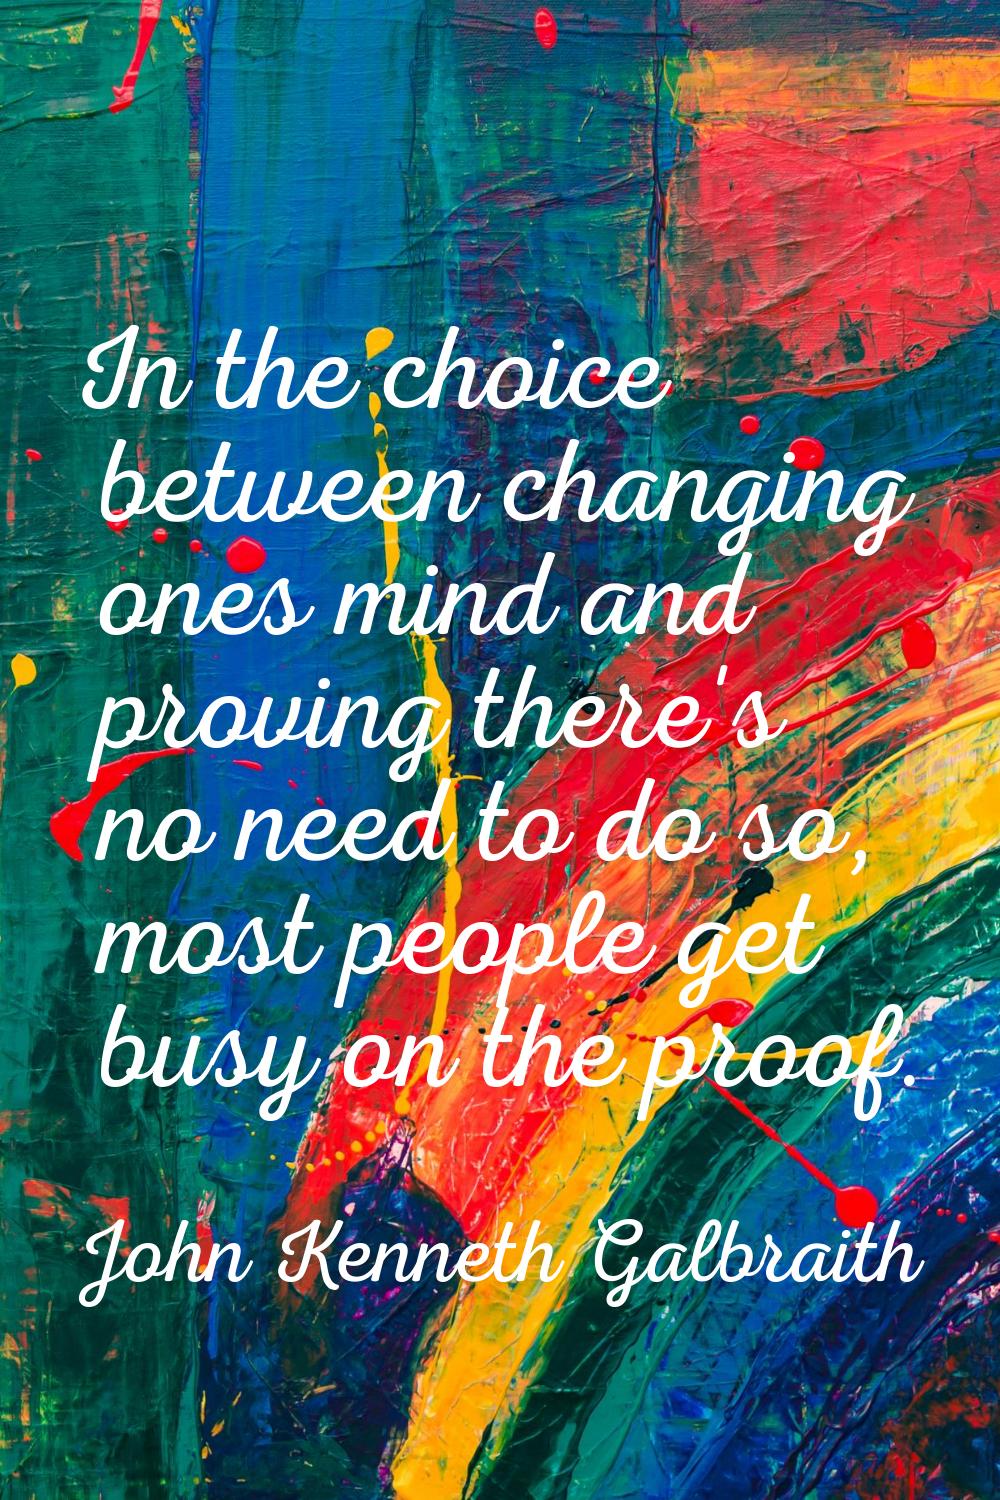 In the choice between changing ones mind and proving there's no need to do so, most people get busy